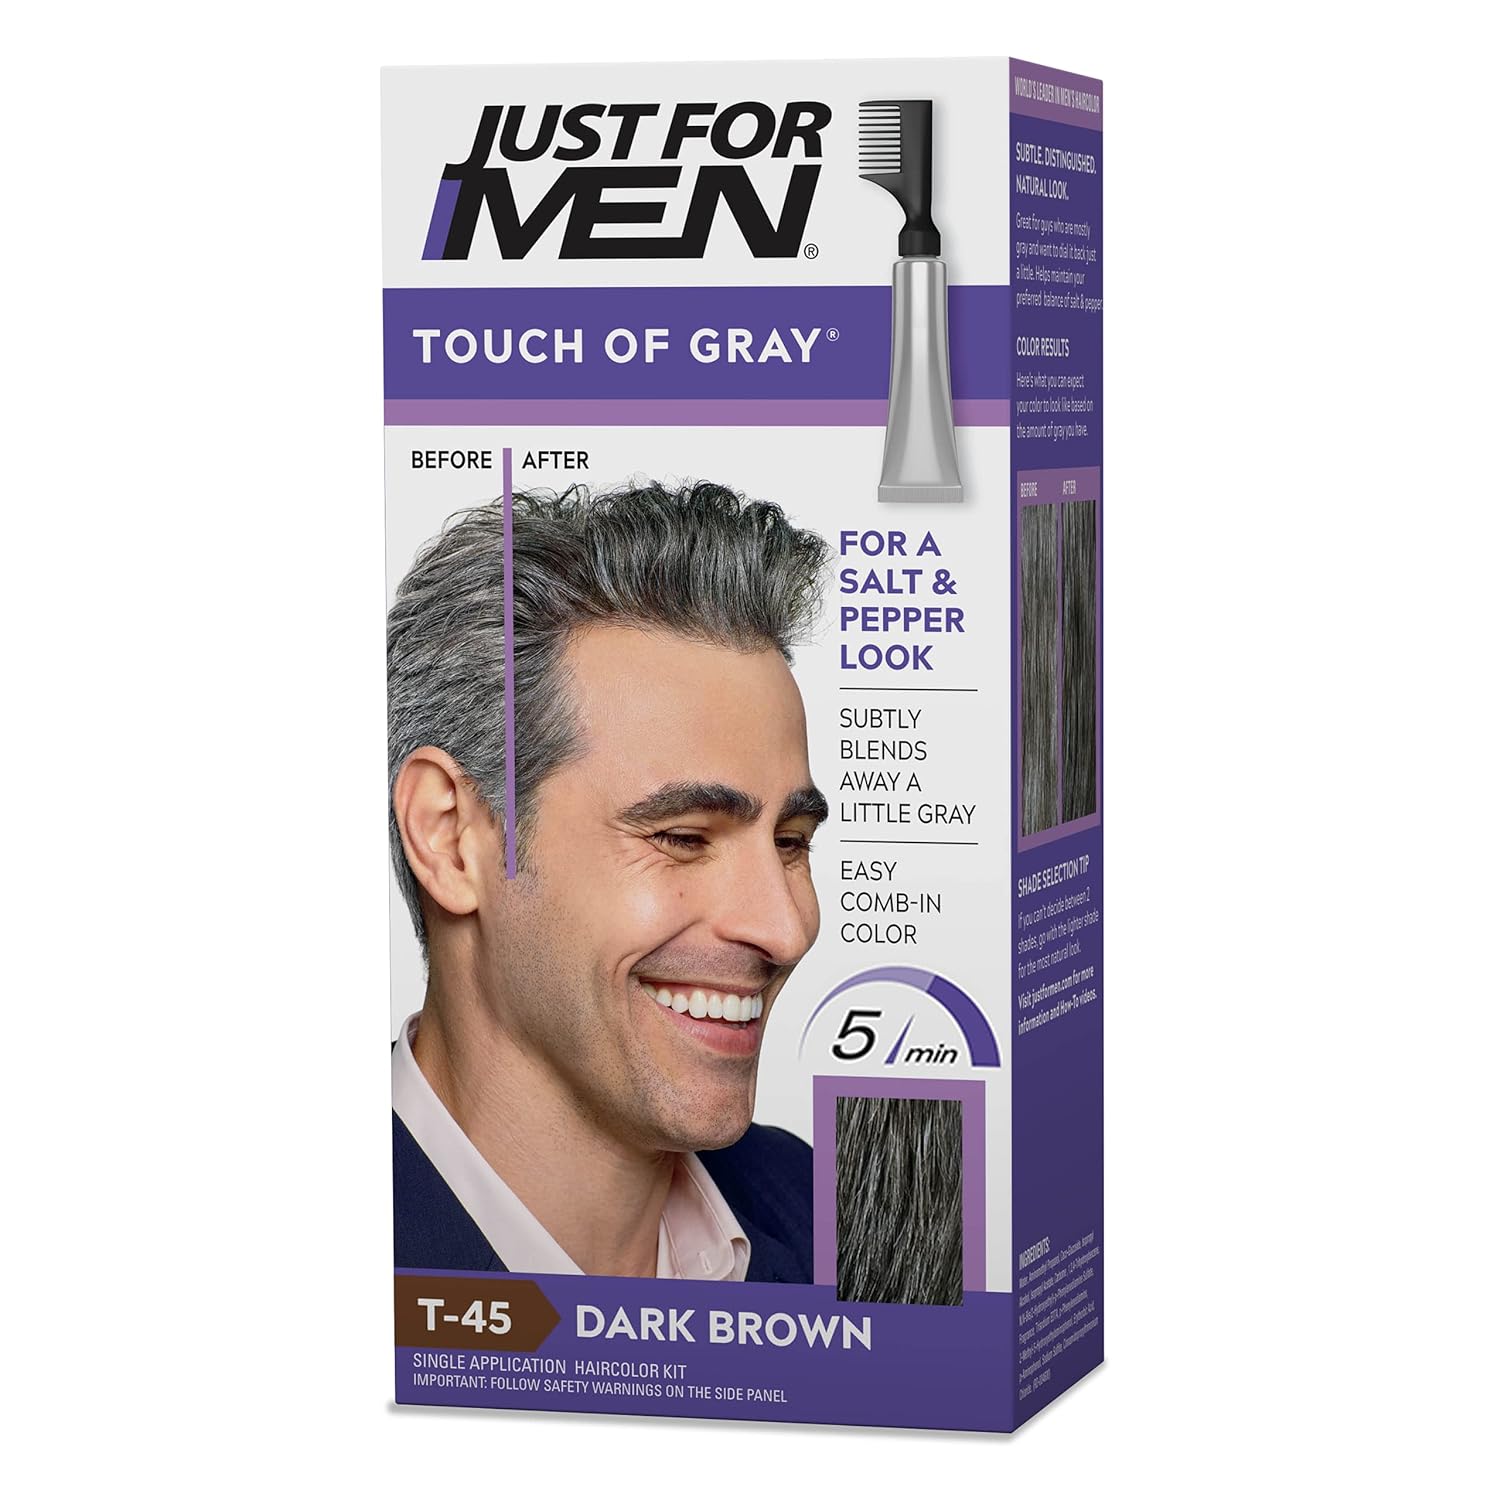 Just For Men Dark Brown Hair Color Mens Kit with Comb A